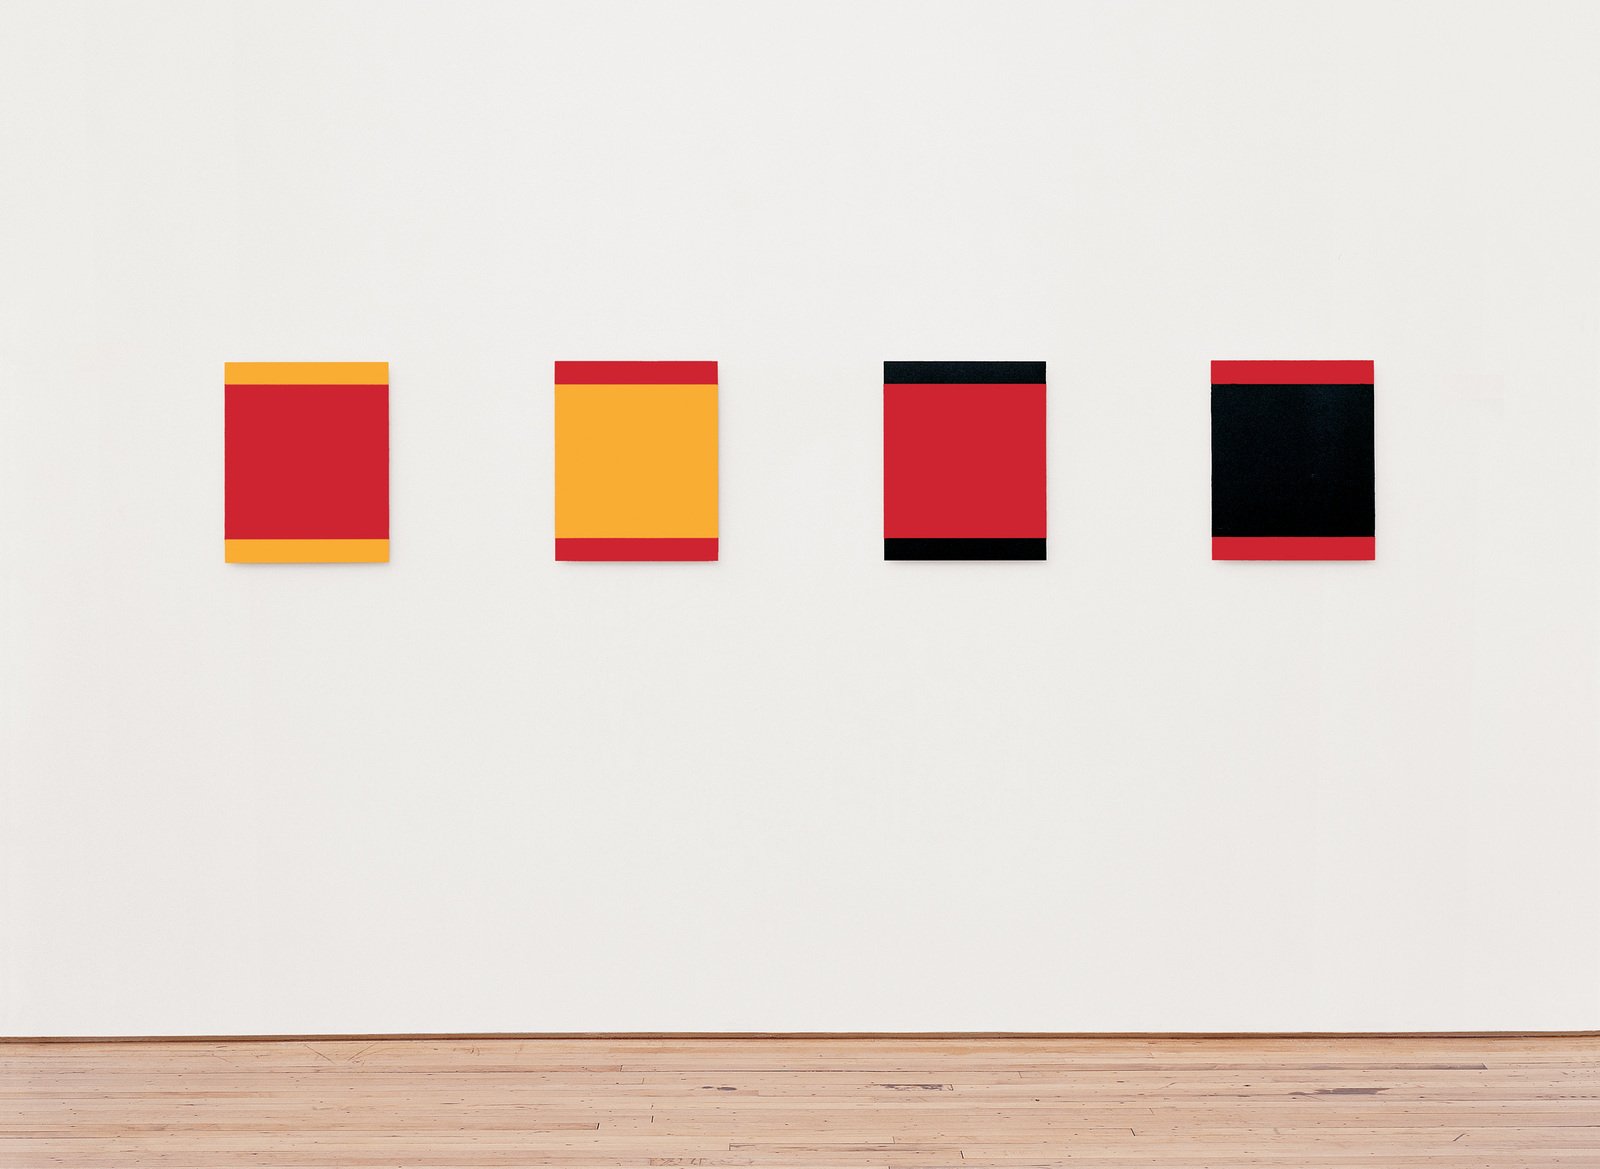 Blinky Palermo, To the People of New York City (Part IX), 1976. Acrylic paint on aluminum in 4 parts, each: 26.7 x 21 cm. Photo: Bill Jacobson Studio, New York. Courtesy Blinky Palermo/Artist Rights society (ARS), New York.